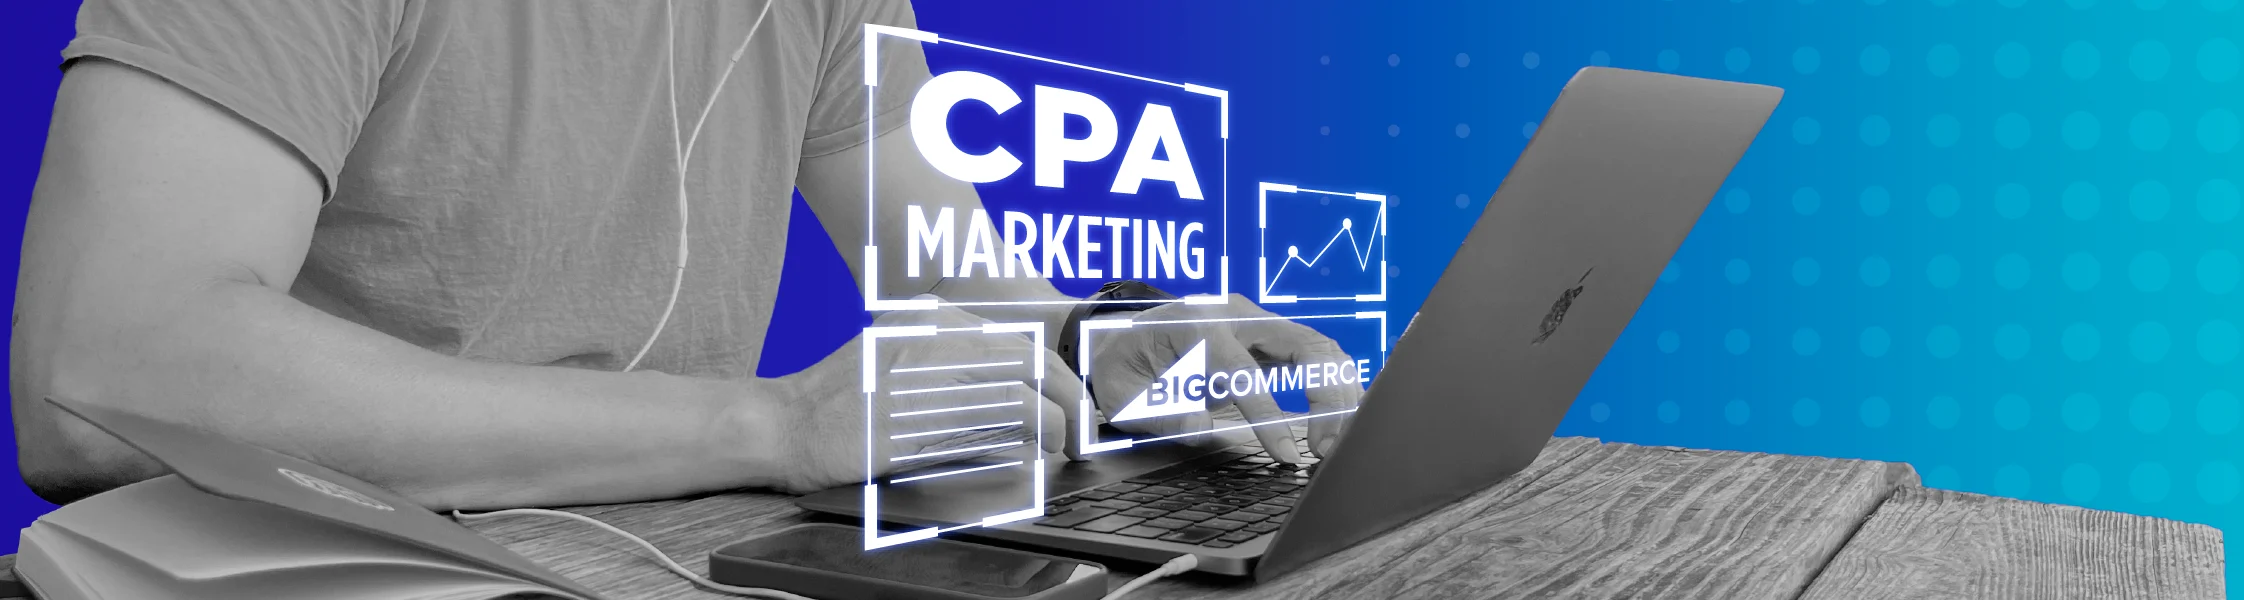 Affiliate Marketing, Affiliate Programs, CPA Offers